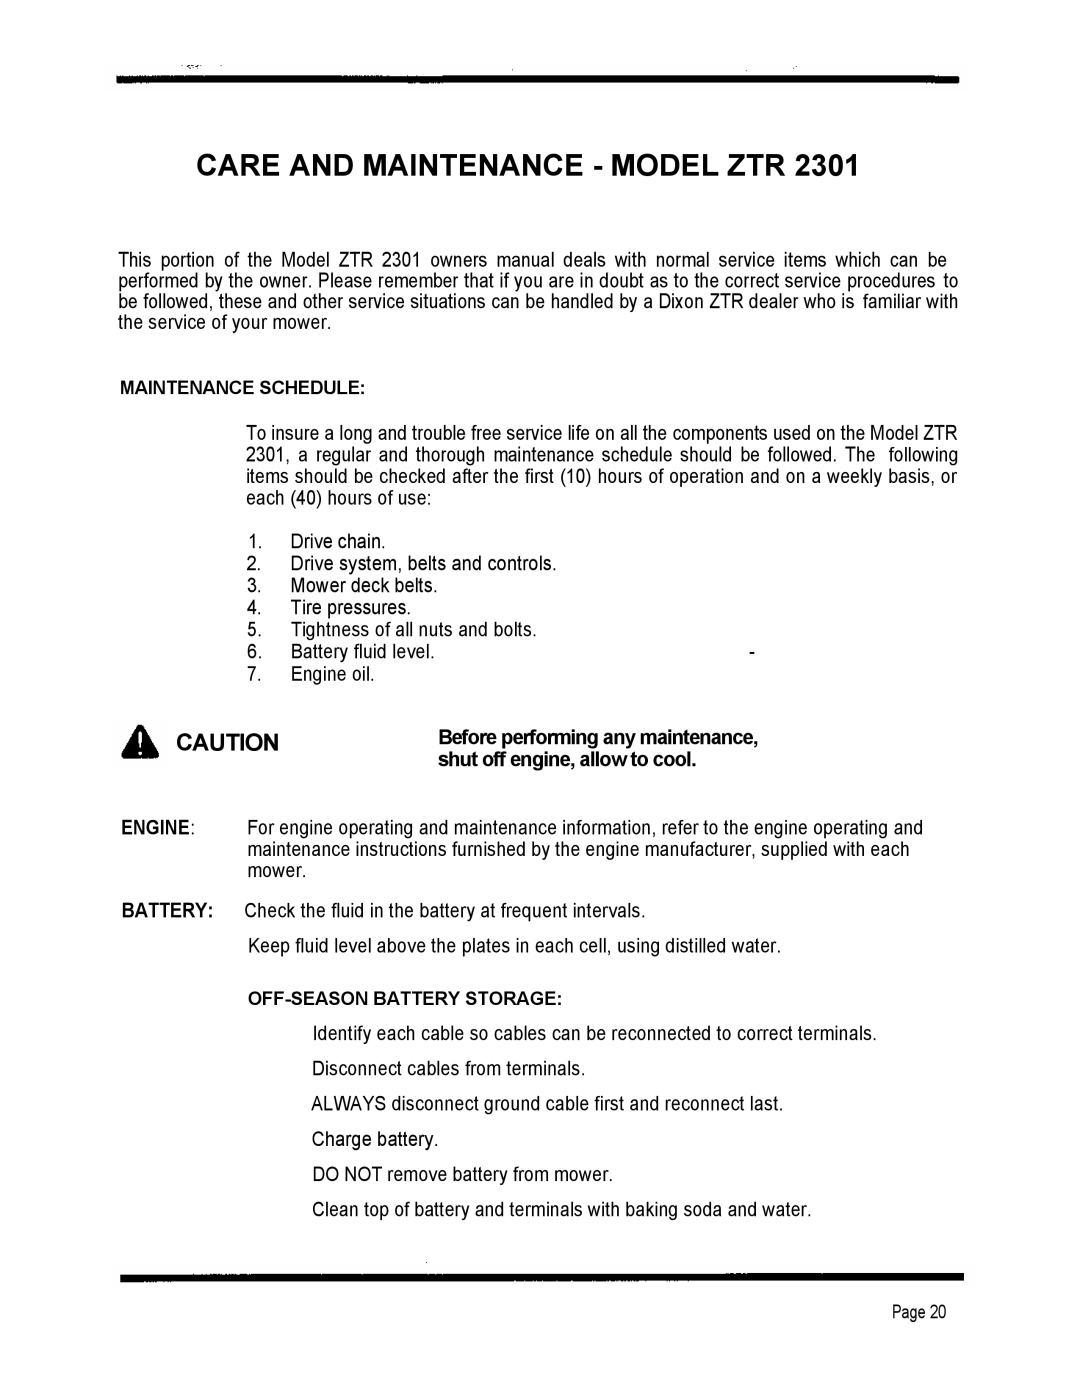 Dixon 2301 manual Care And Maintenance - Model Ztr, shut off engine, allow to cool 